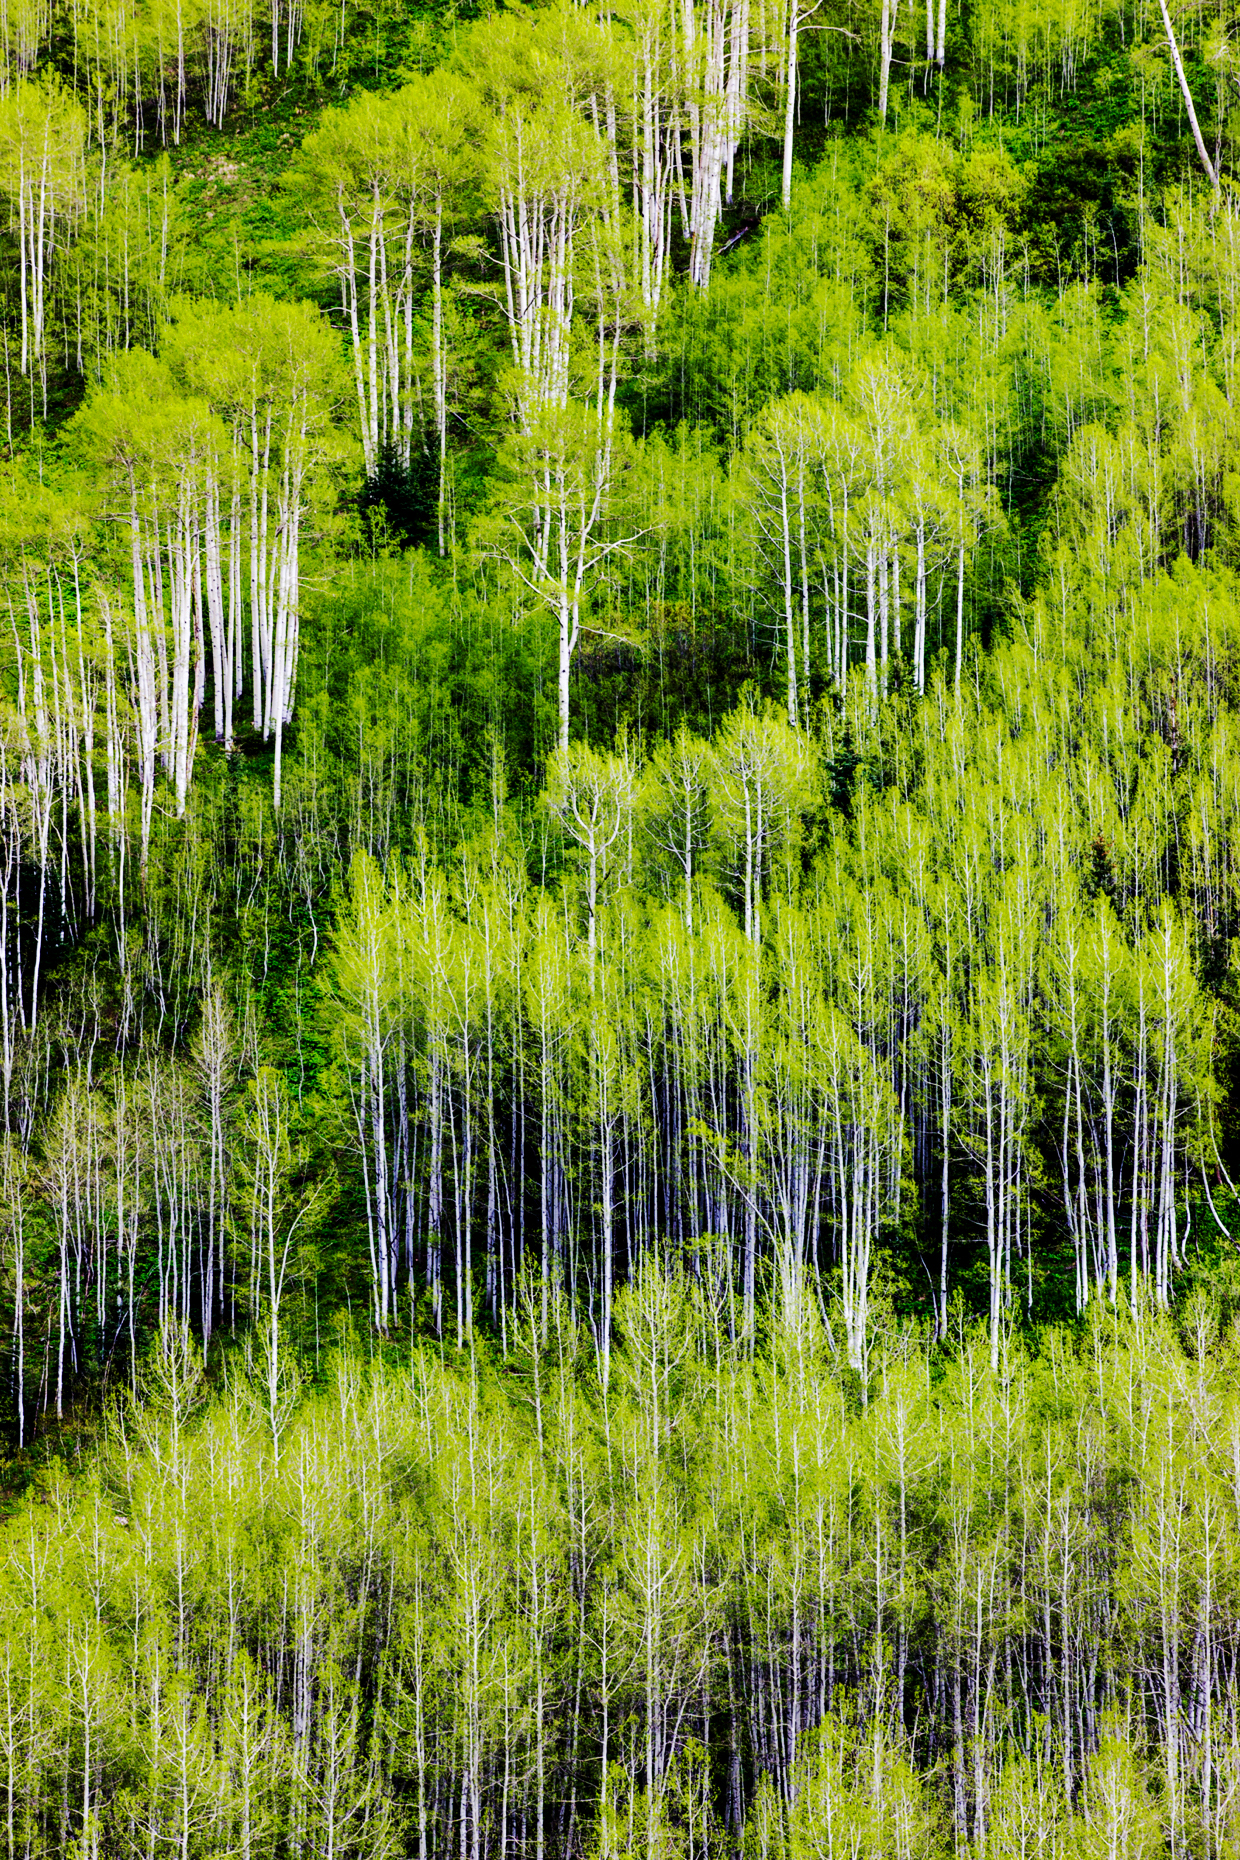 The fresh springtime green leaves of Aspen trees create color and patterns on the mountainsides in the Maroon Bells Snowmass Wilderness Area near Aspen, Colorado, USA 